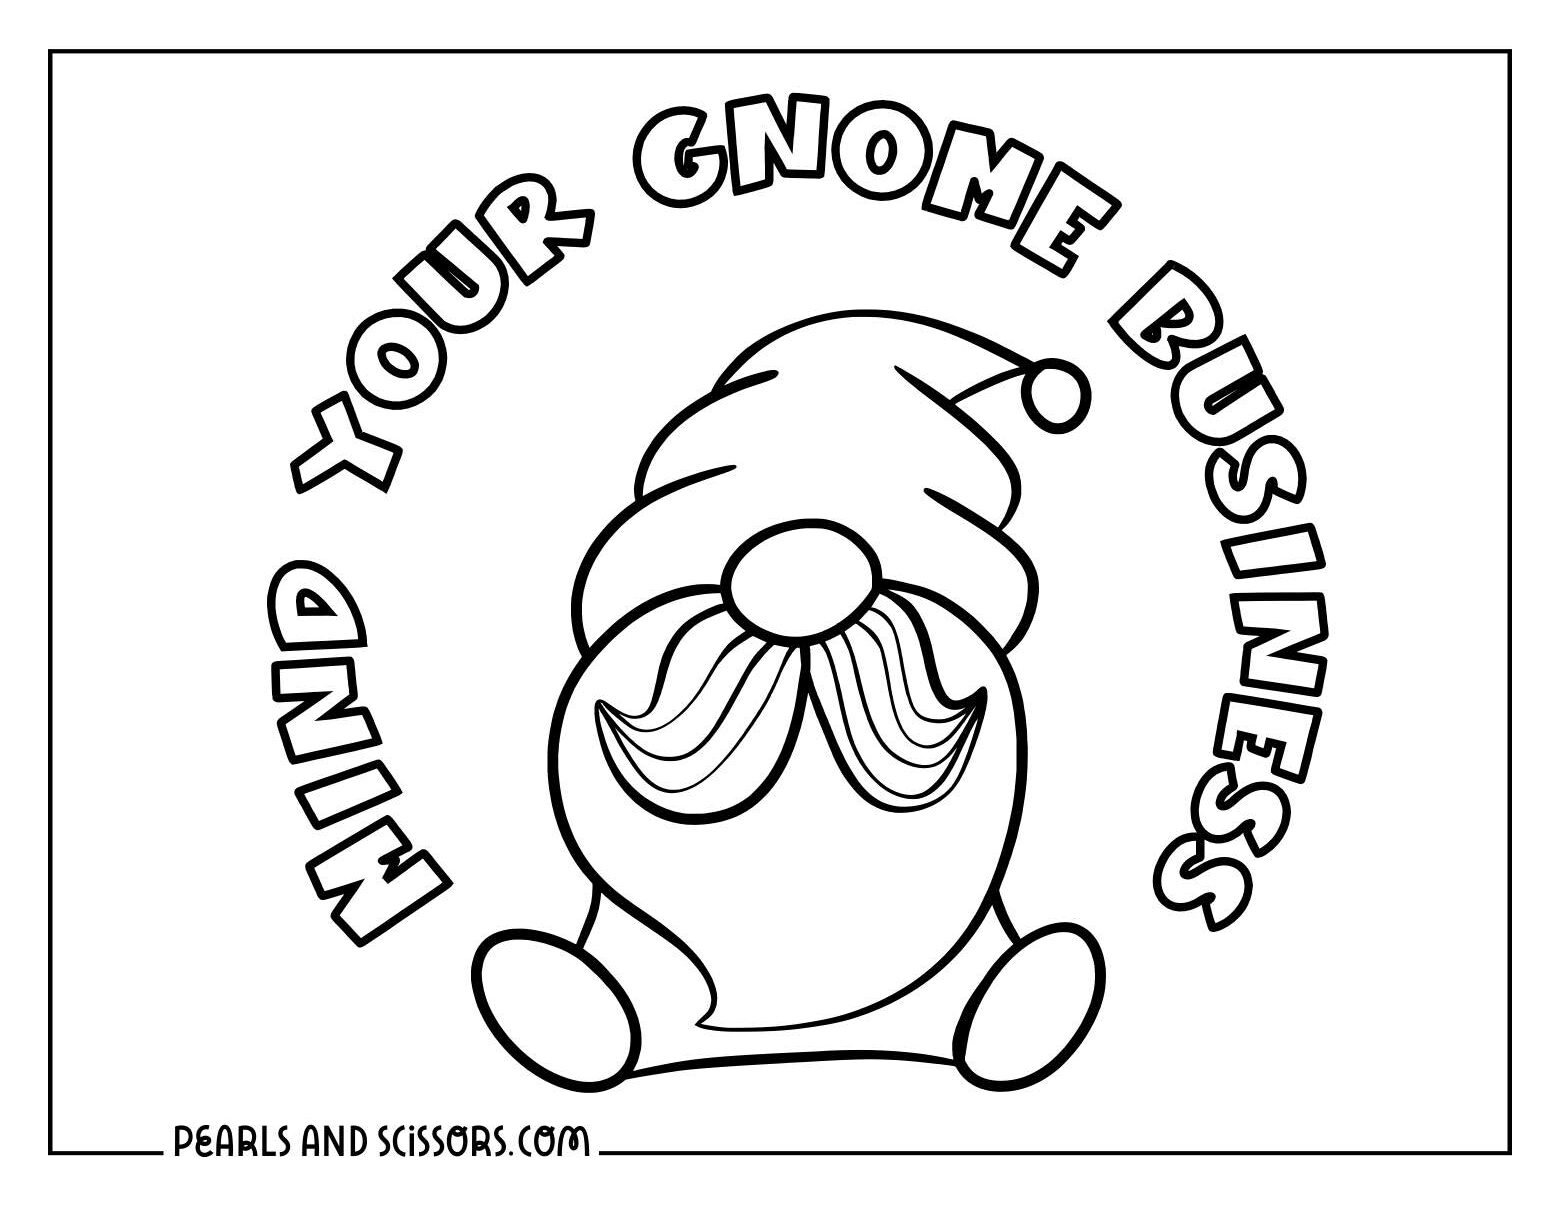 Simple outline of a christmas gnome coloring page for kids.